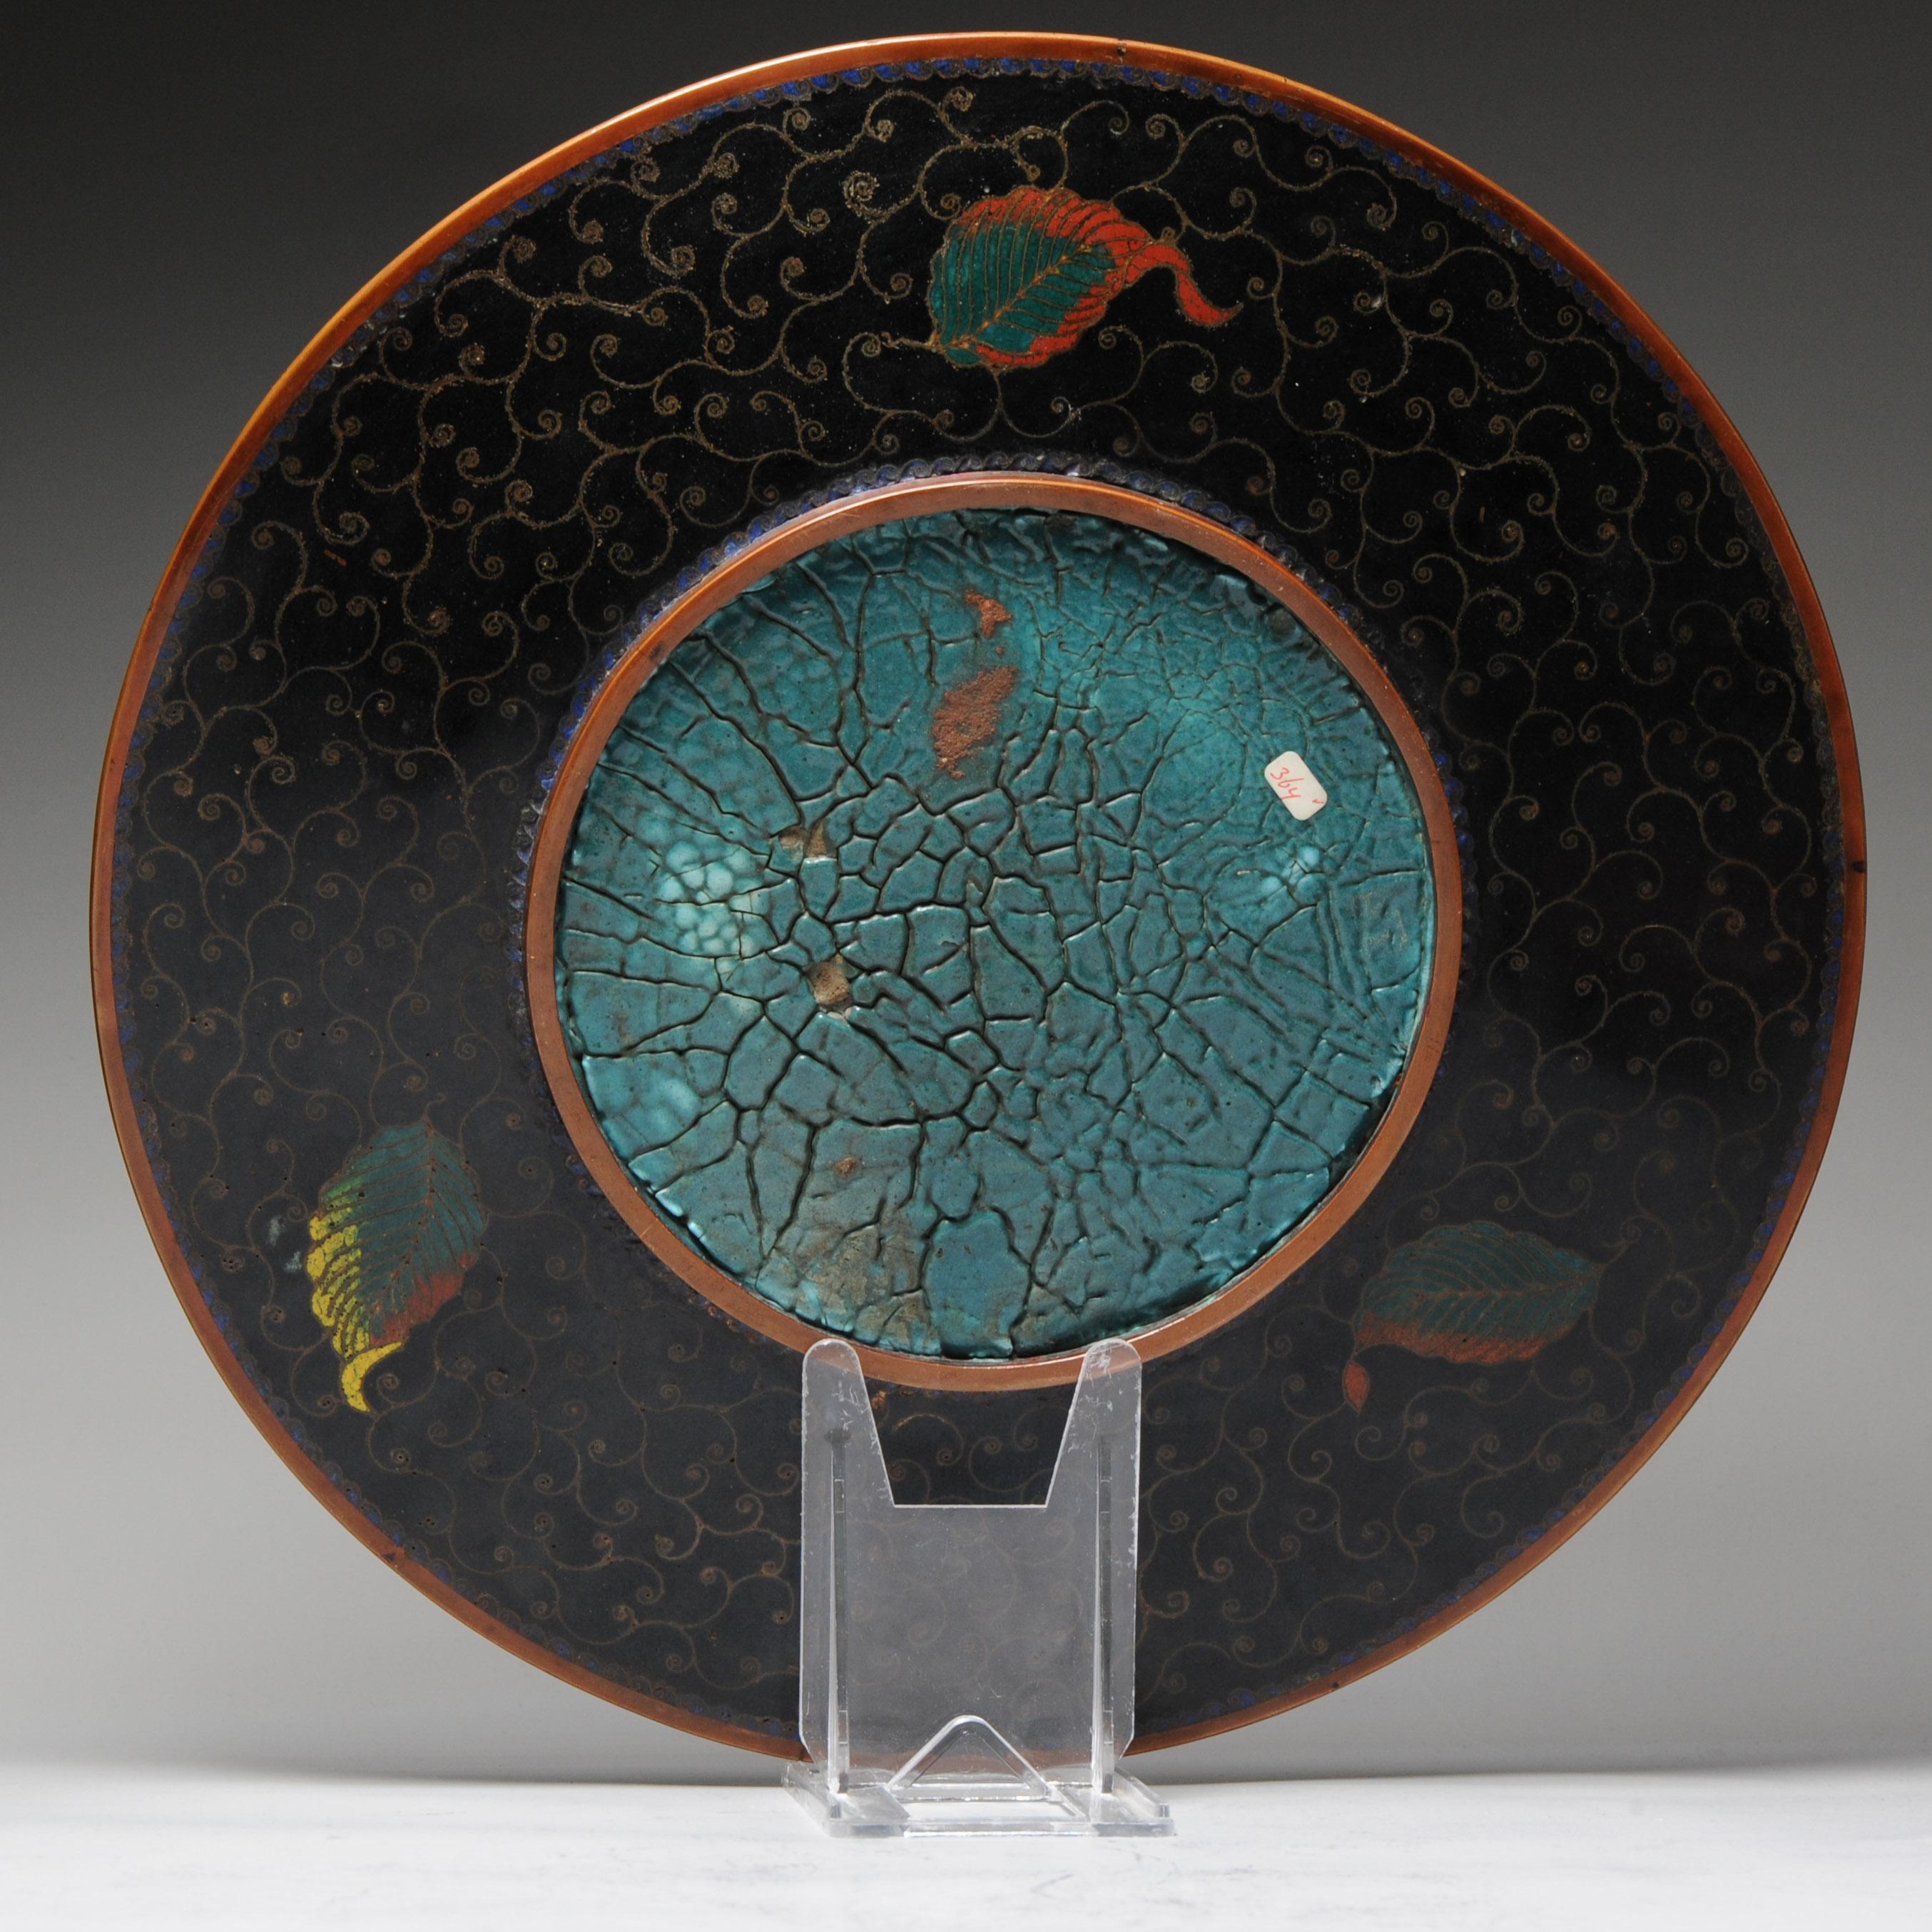 Lovely and beautifully made piece. With a stunning gold fish scene.

Originally of the Catherina collection of Japanese bronzes and cloisonne that was partly auctioned in Amsterdam in 2006 at Sothebys. This piece is pictured in the catalogue of the